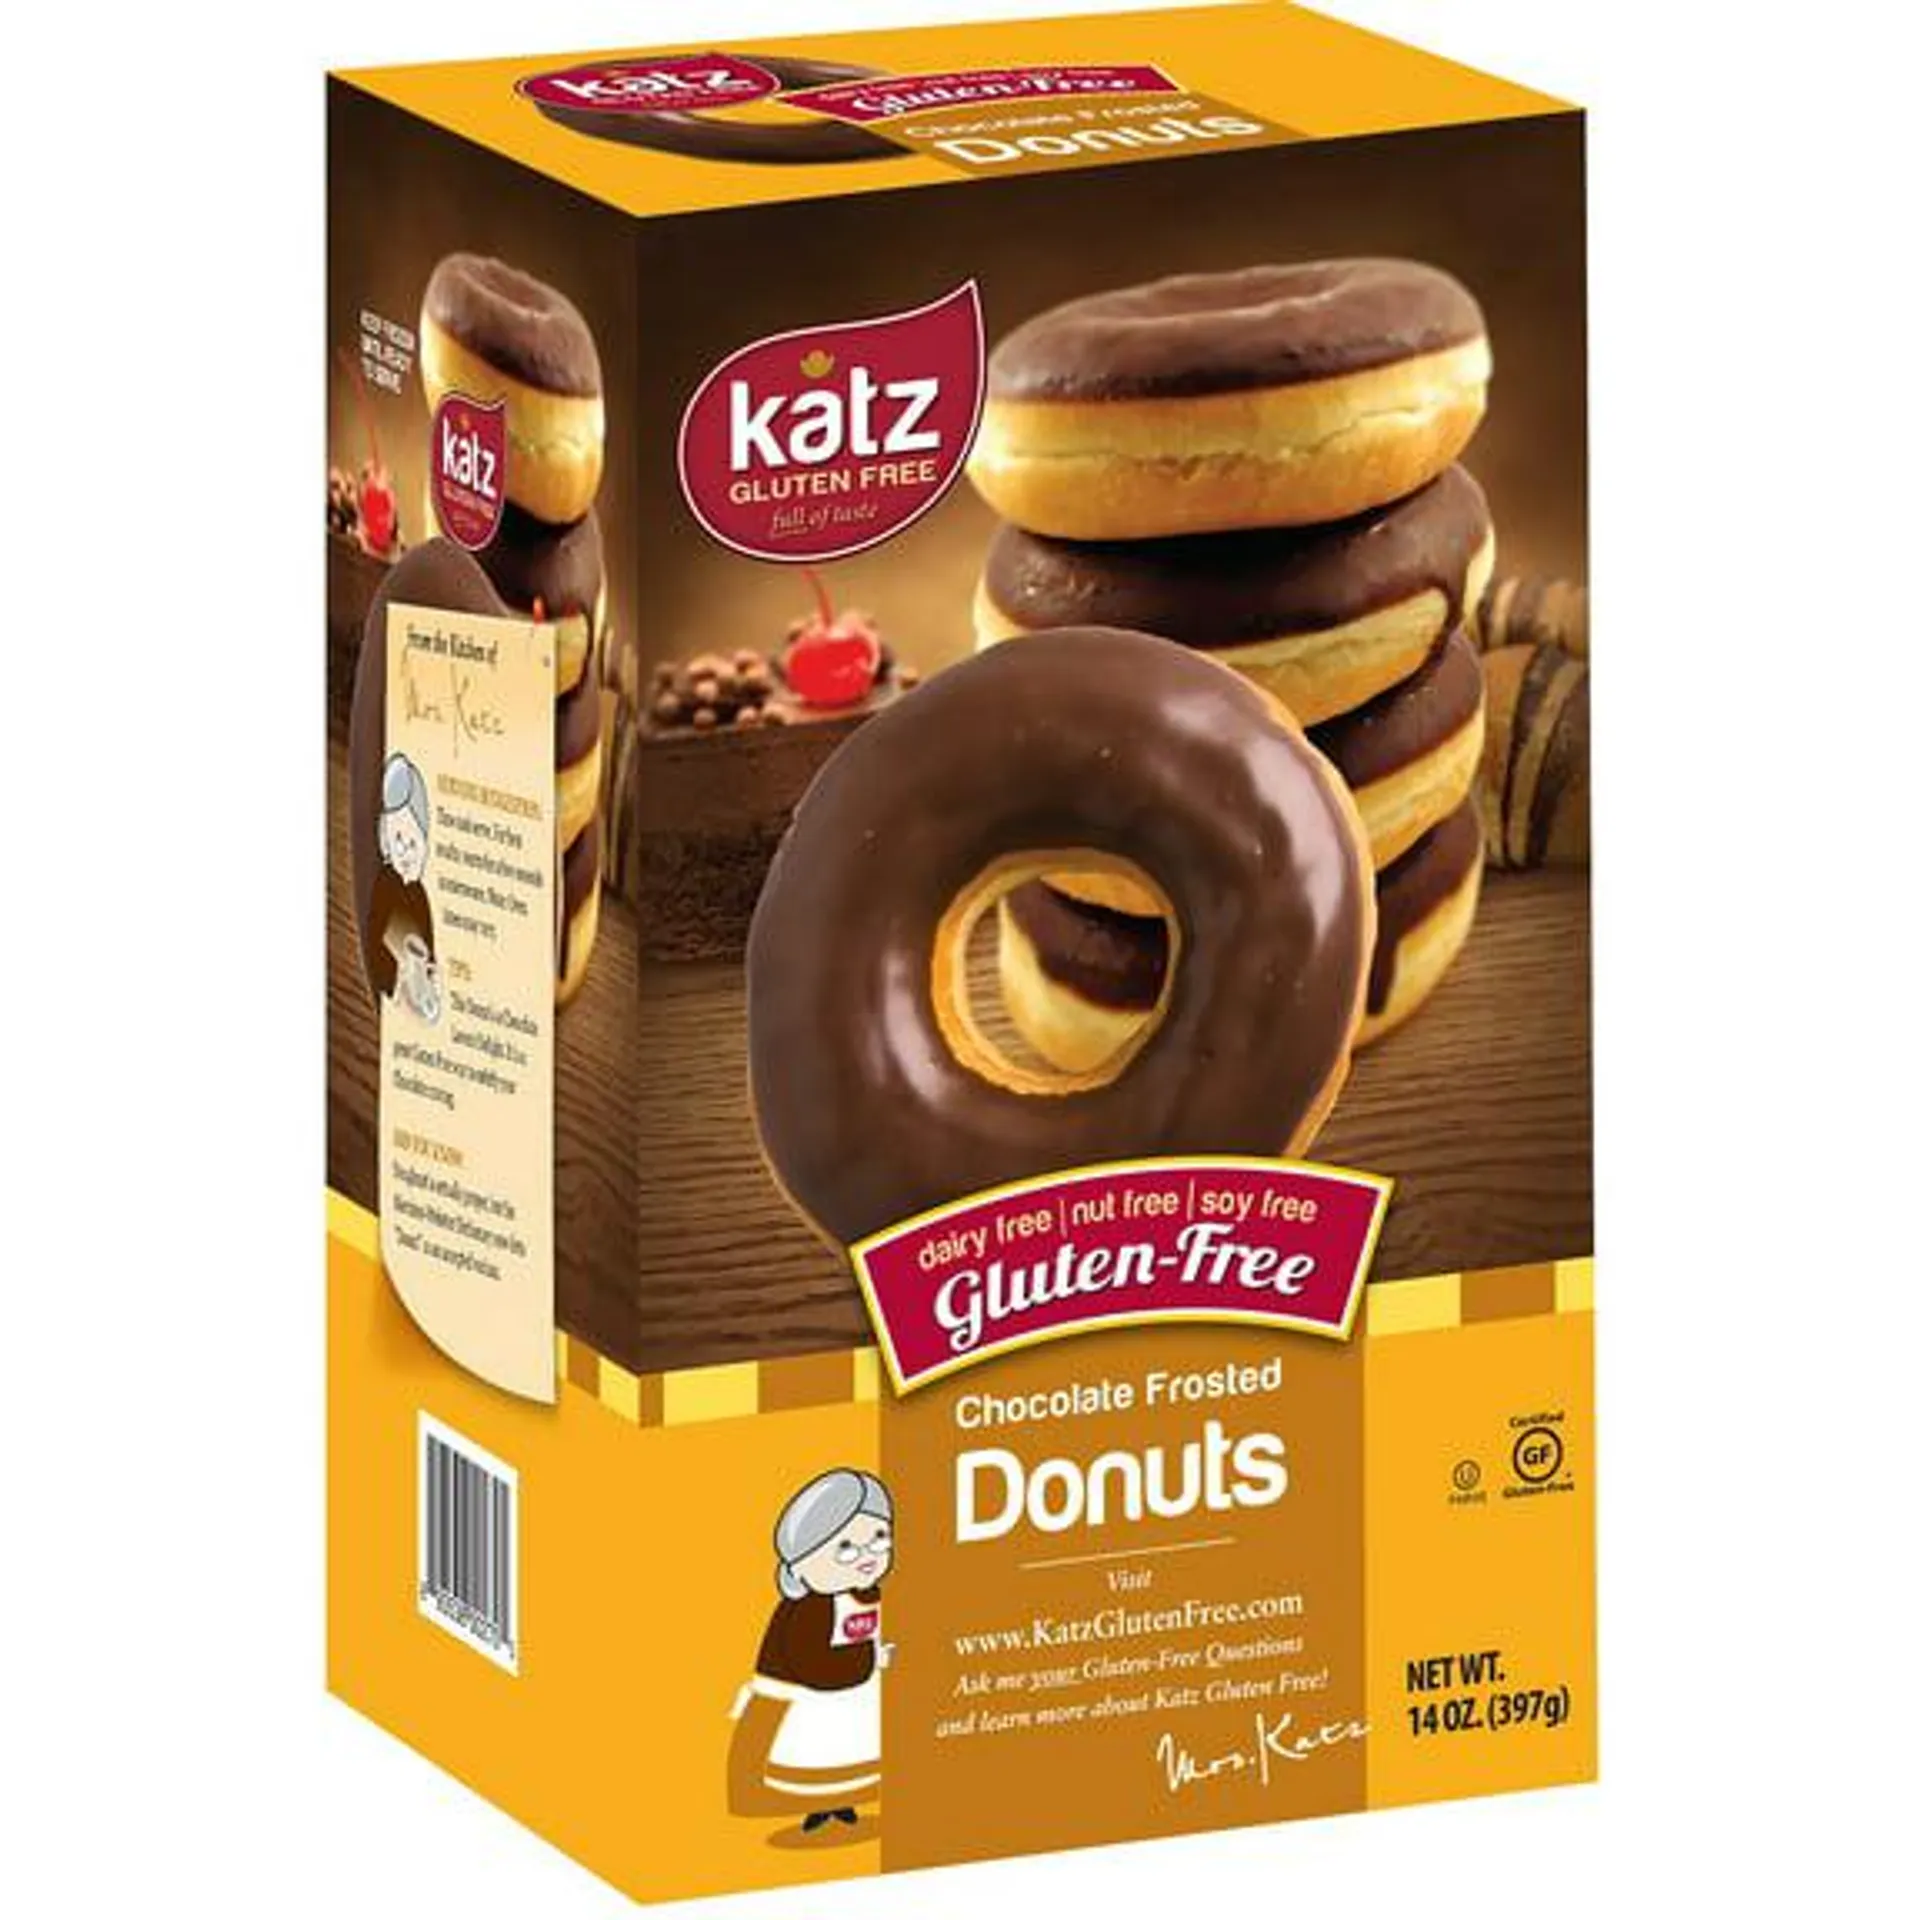 Katz Gluten Free Chocolate Frosted Donuts | Gluten Free, Dairy Free, Nut Free, Soy Free, Kosher | (1 Pack, 11.3 Ounce Each)